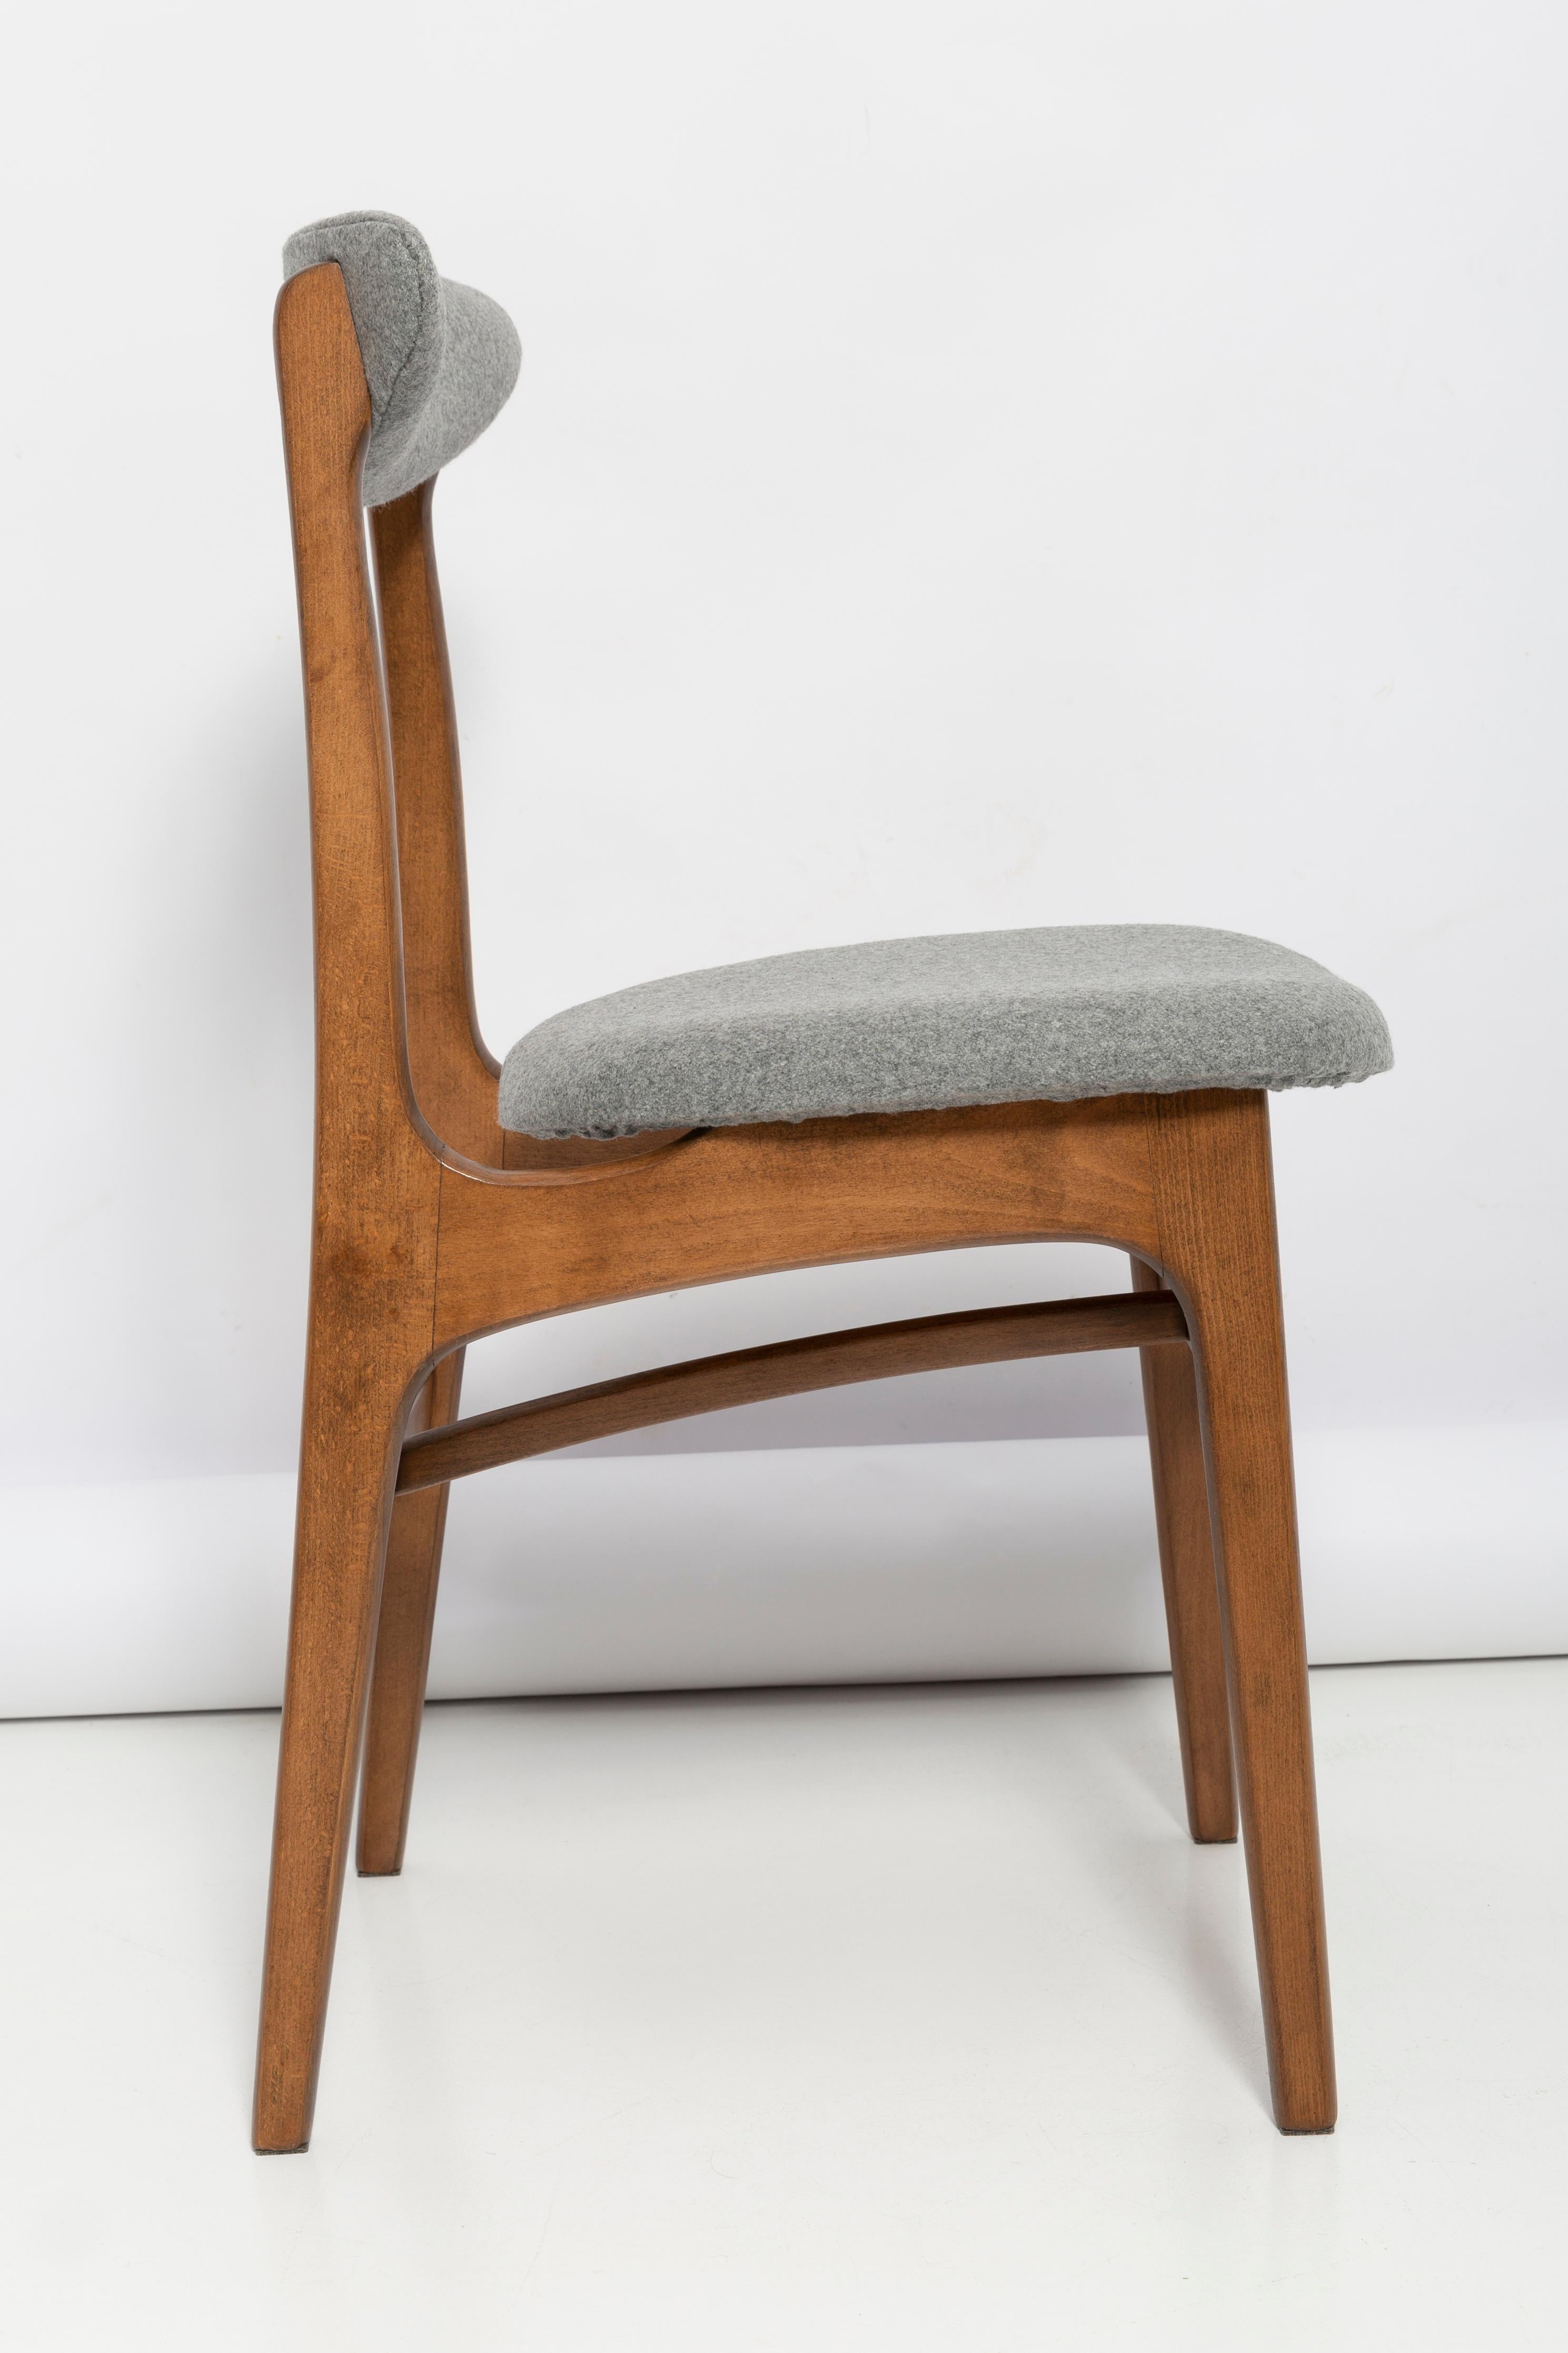 Hand-Crafted Mid Century Gray Wool Chair Designed by Rajmund Halas, Poland, 1960s For Sale